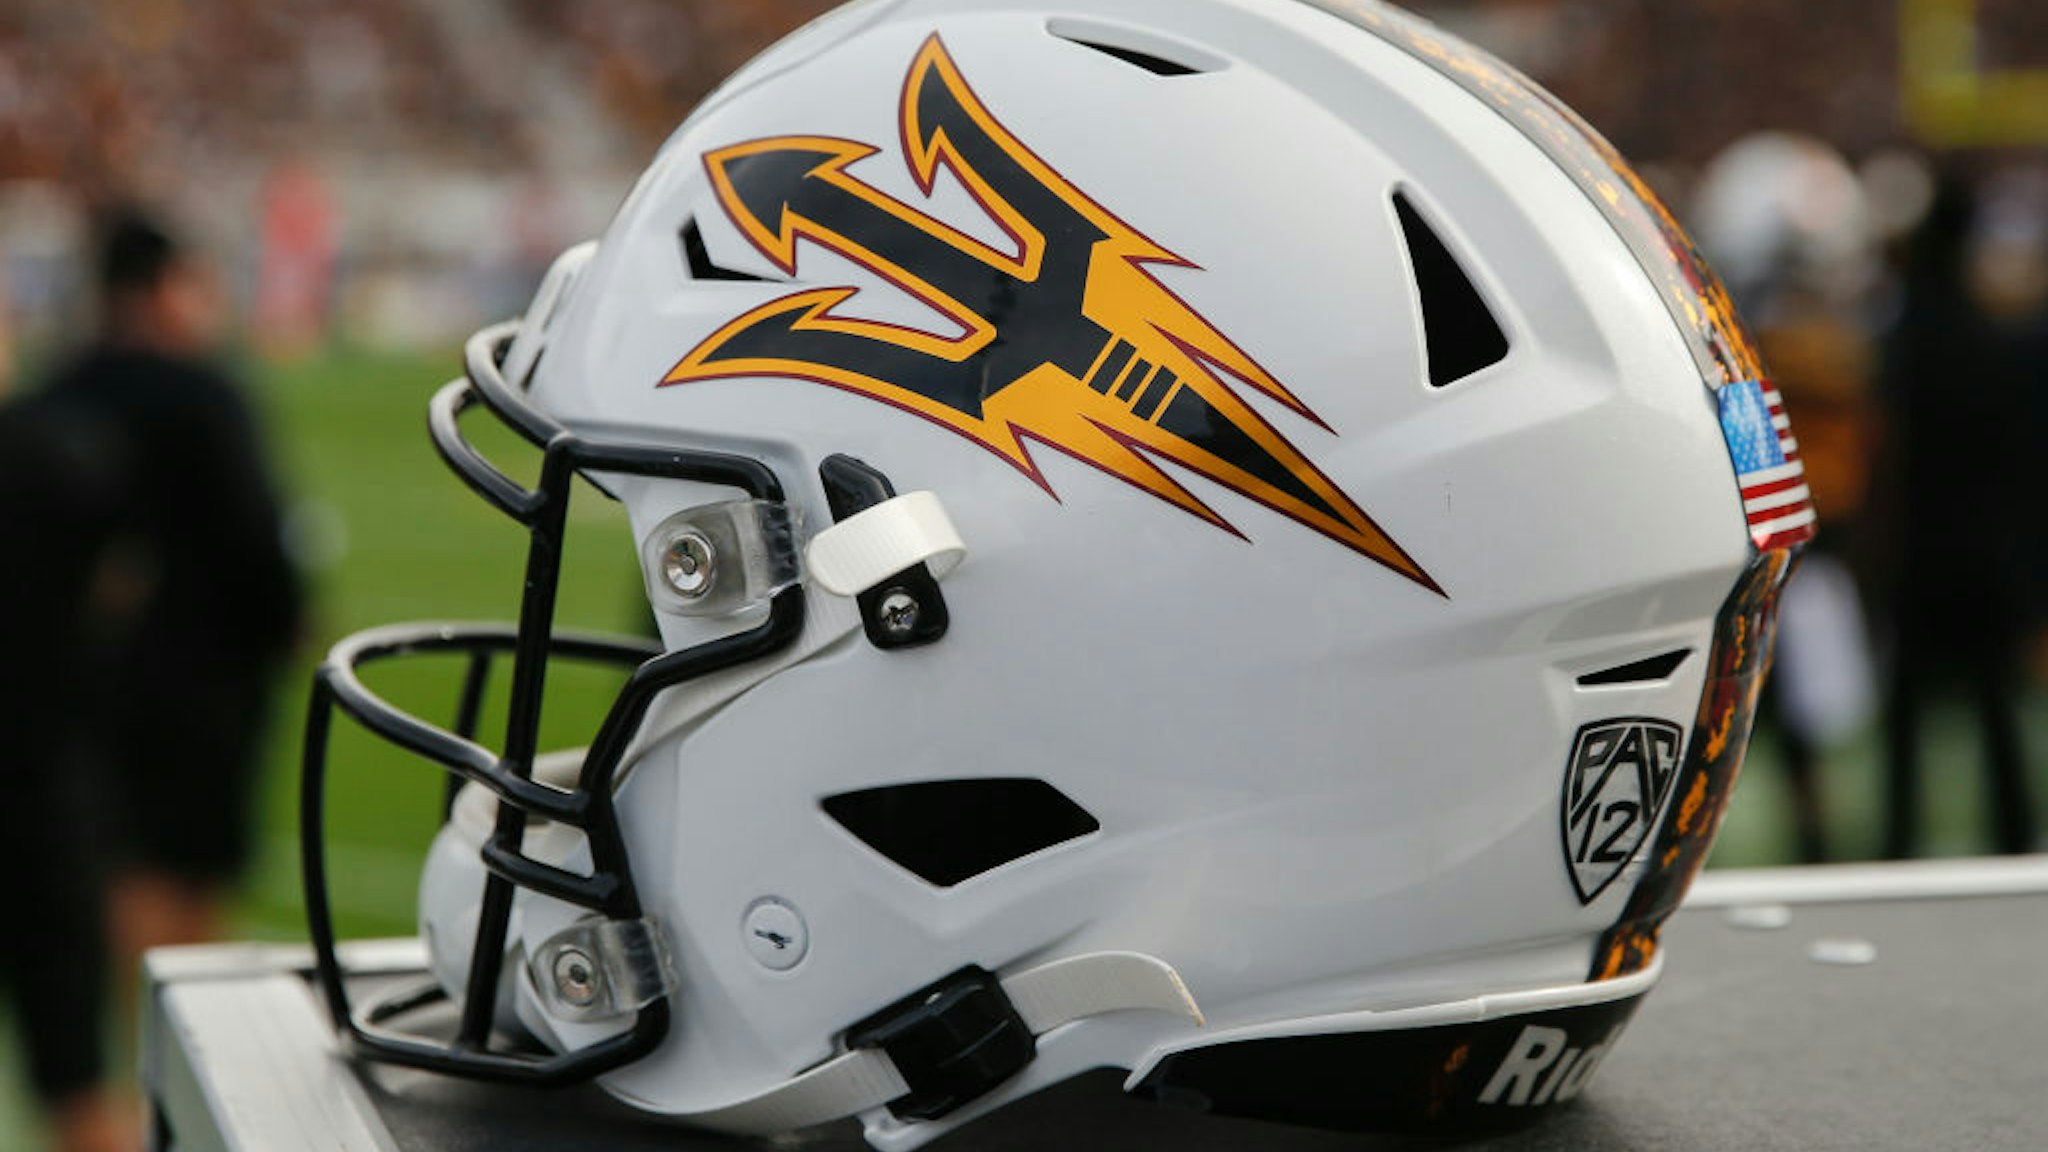 TEMPE, AZ - NOVEMBER 09: An Arizona State Sun Devils helmet during the college football game between the USC Trojans and the Arizona State Sun Devils on November 9, 2019 at Sun Devil Stadium in Tempe, Arizona. (Photo by Kevin Abele/Icon Sportswire via Getty Images)